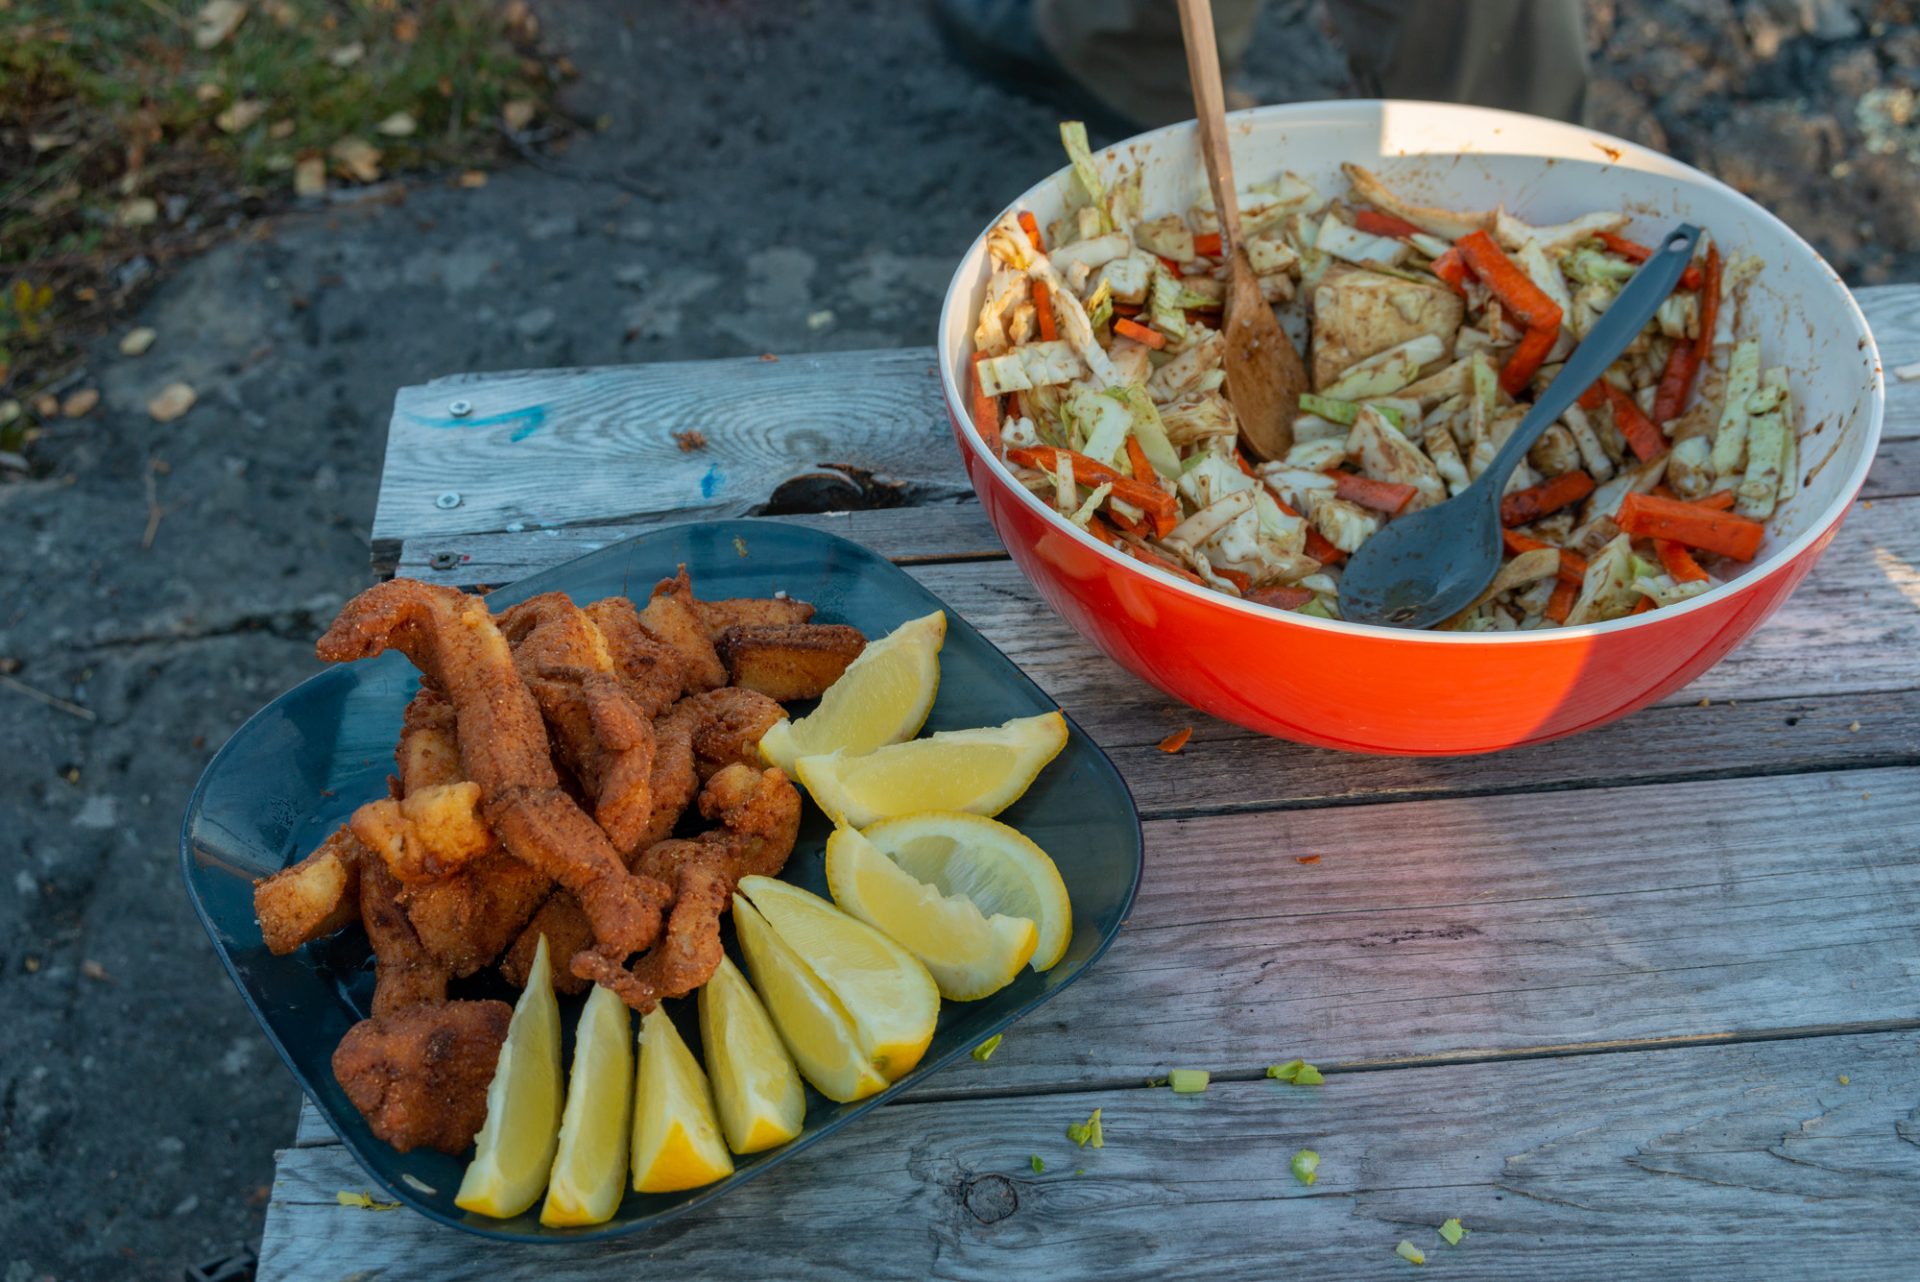 Our Canoe And Kayak Trip Food The Best Camping Meals